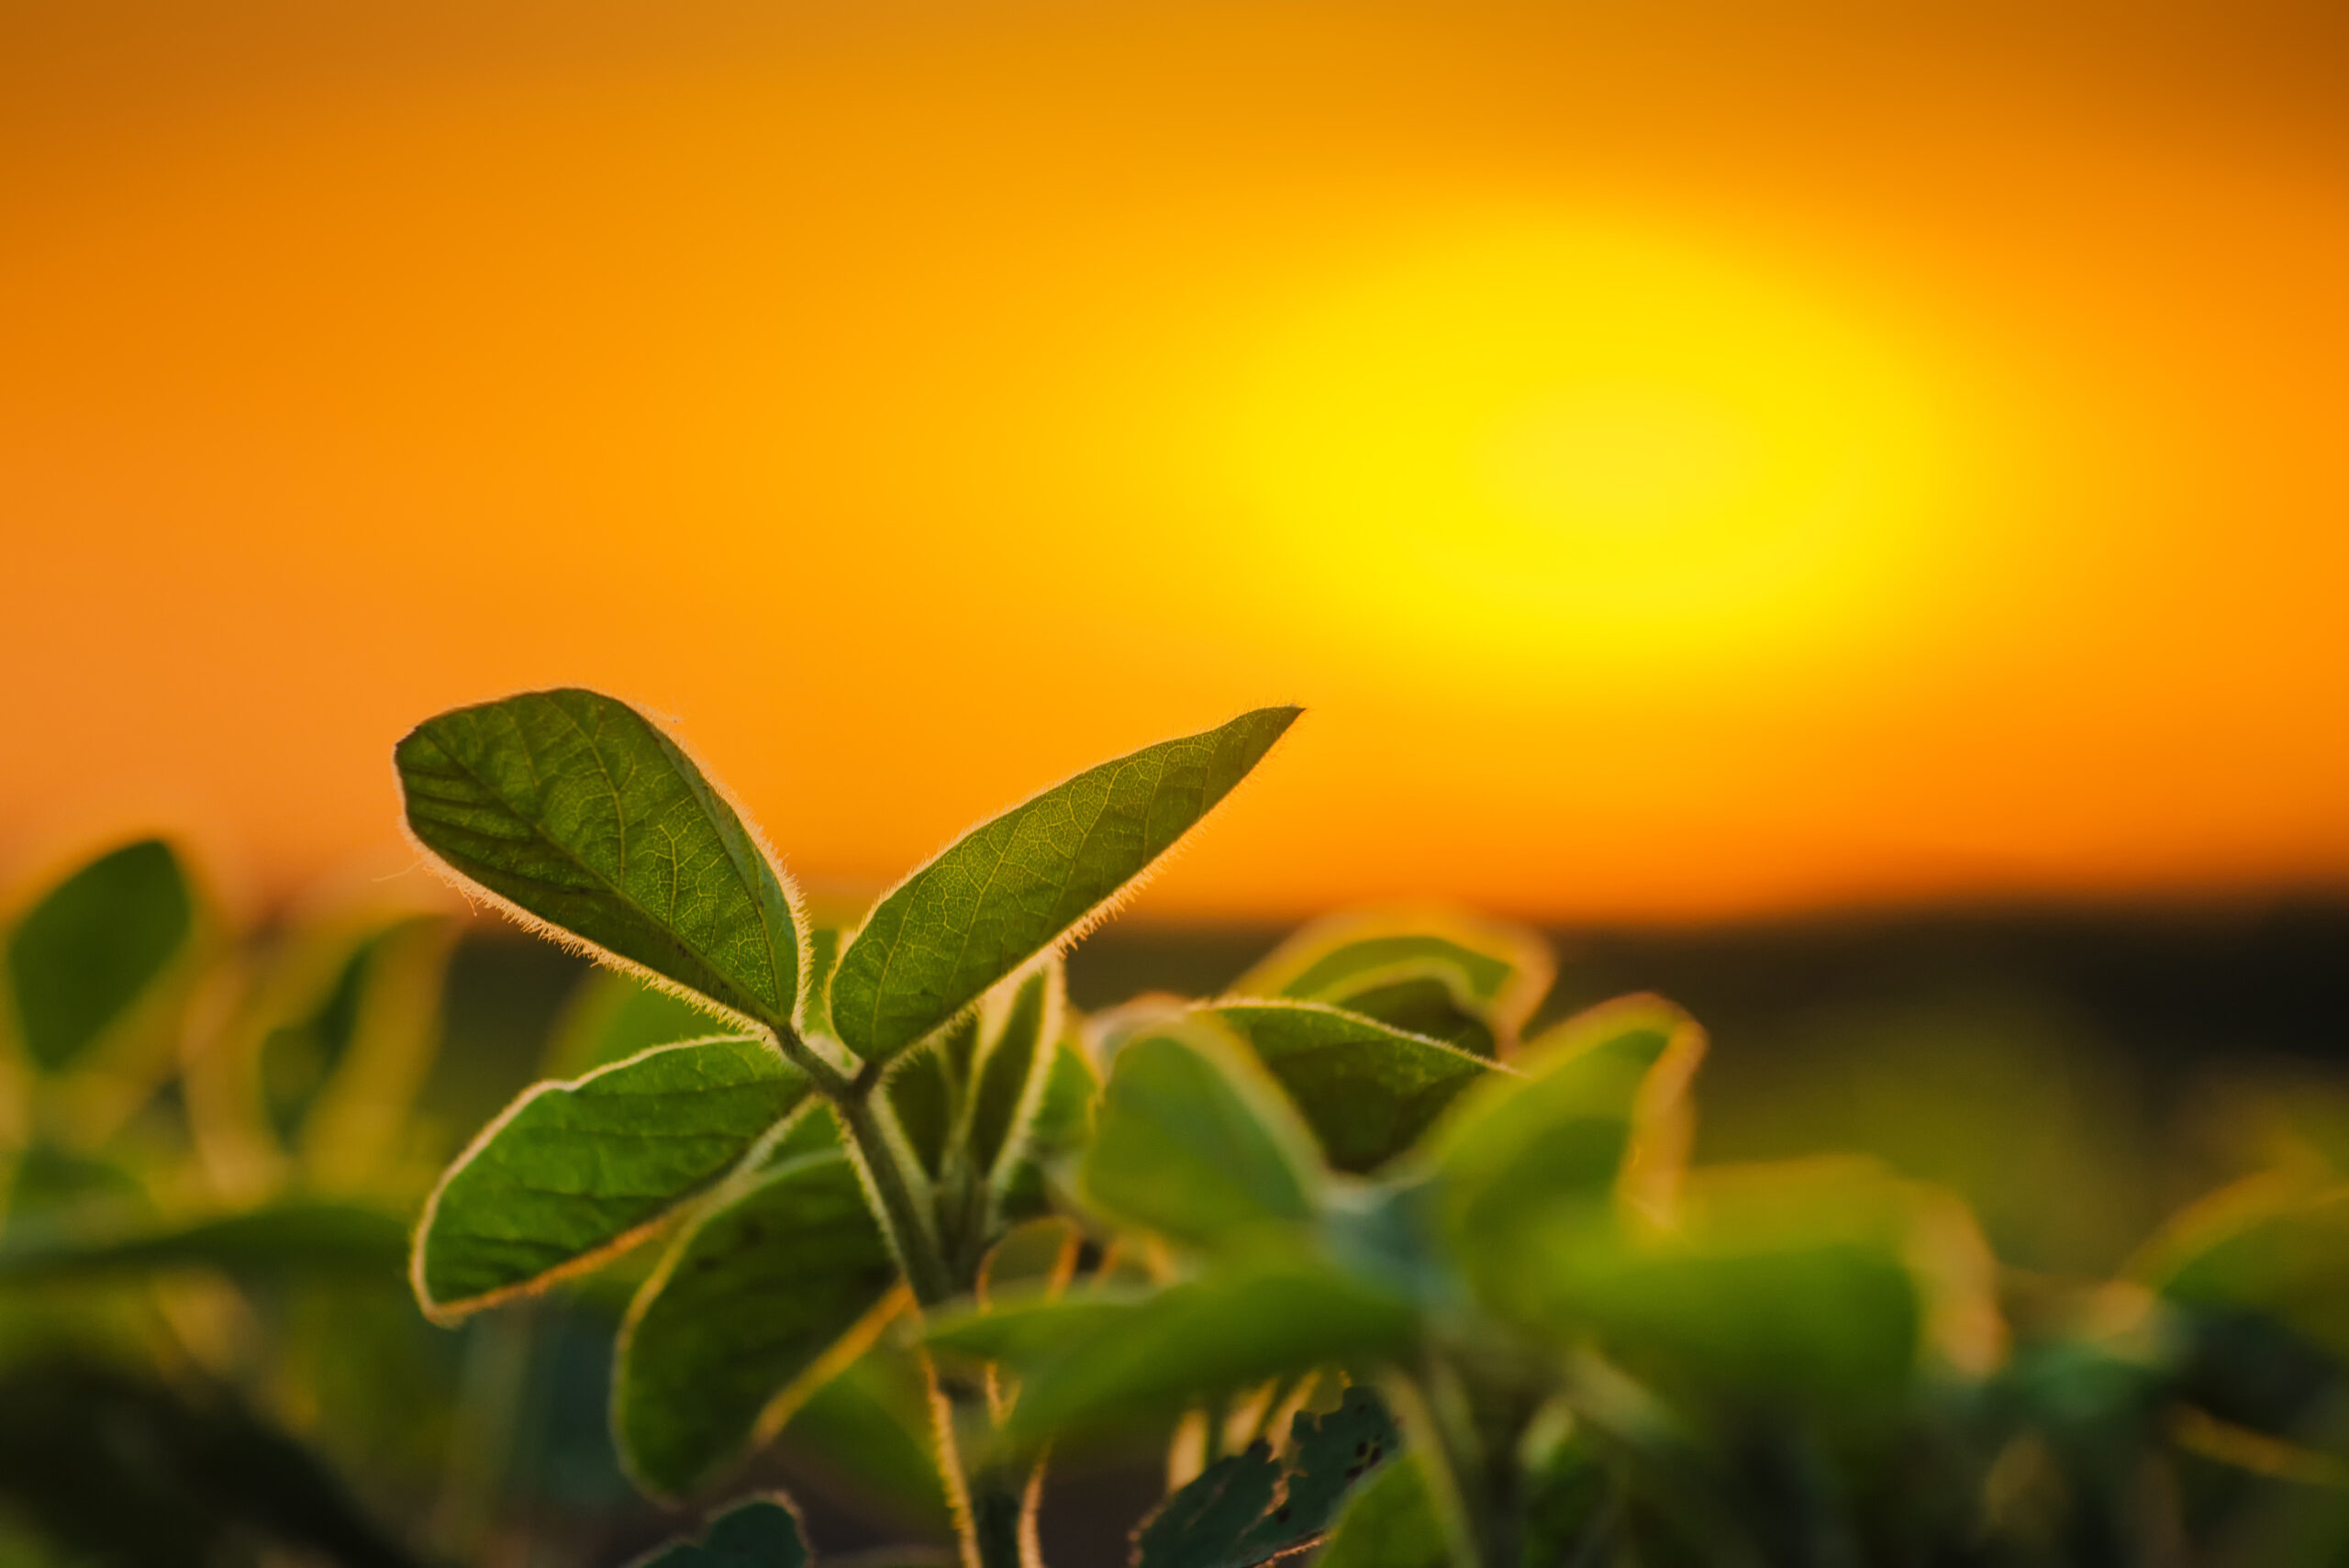 Soybeans at Sunrise